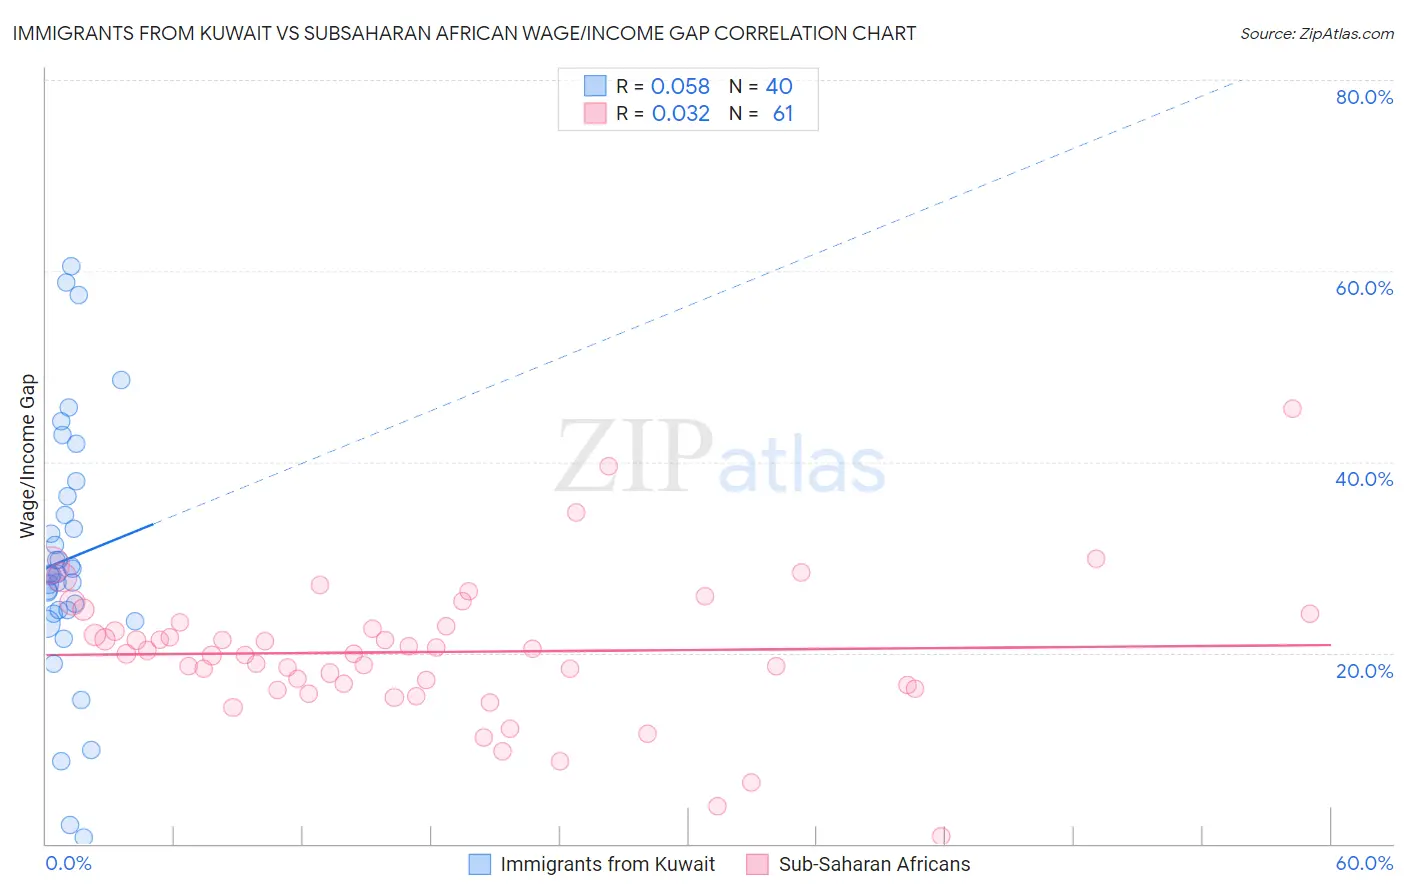 Immigrants from Kuwait vs Subsaharan African Wage/Income Gap